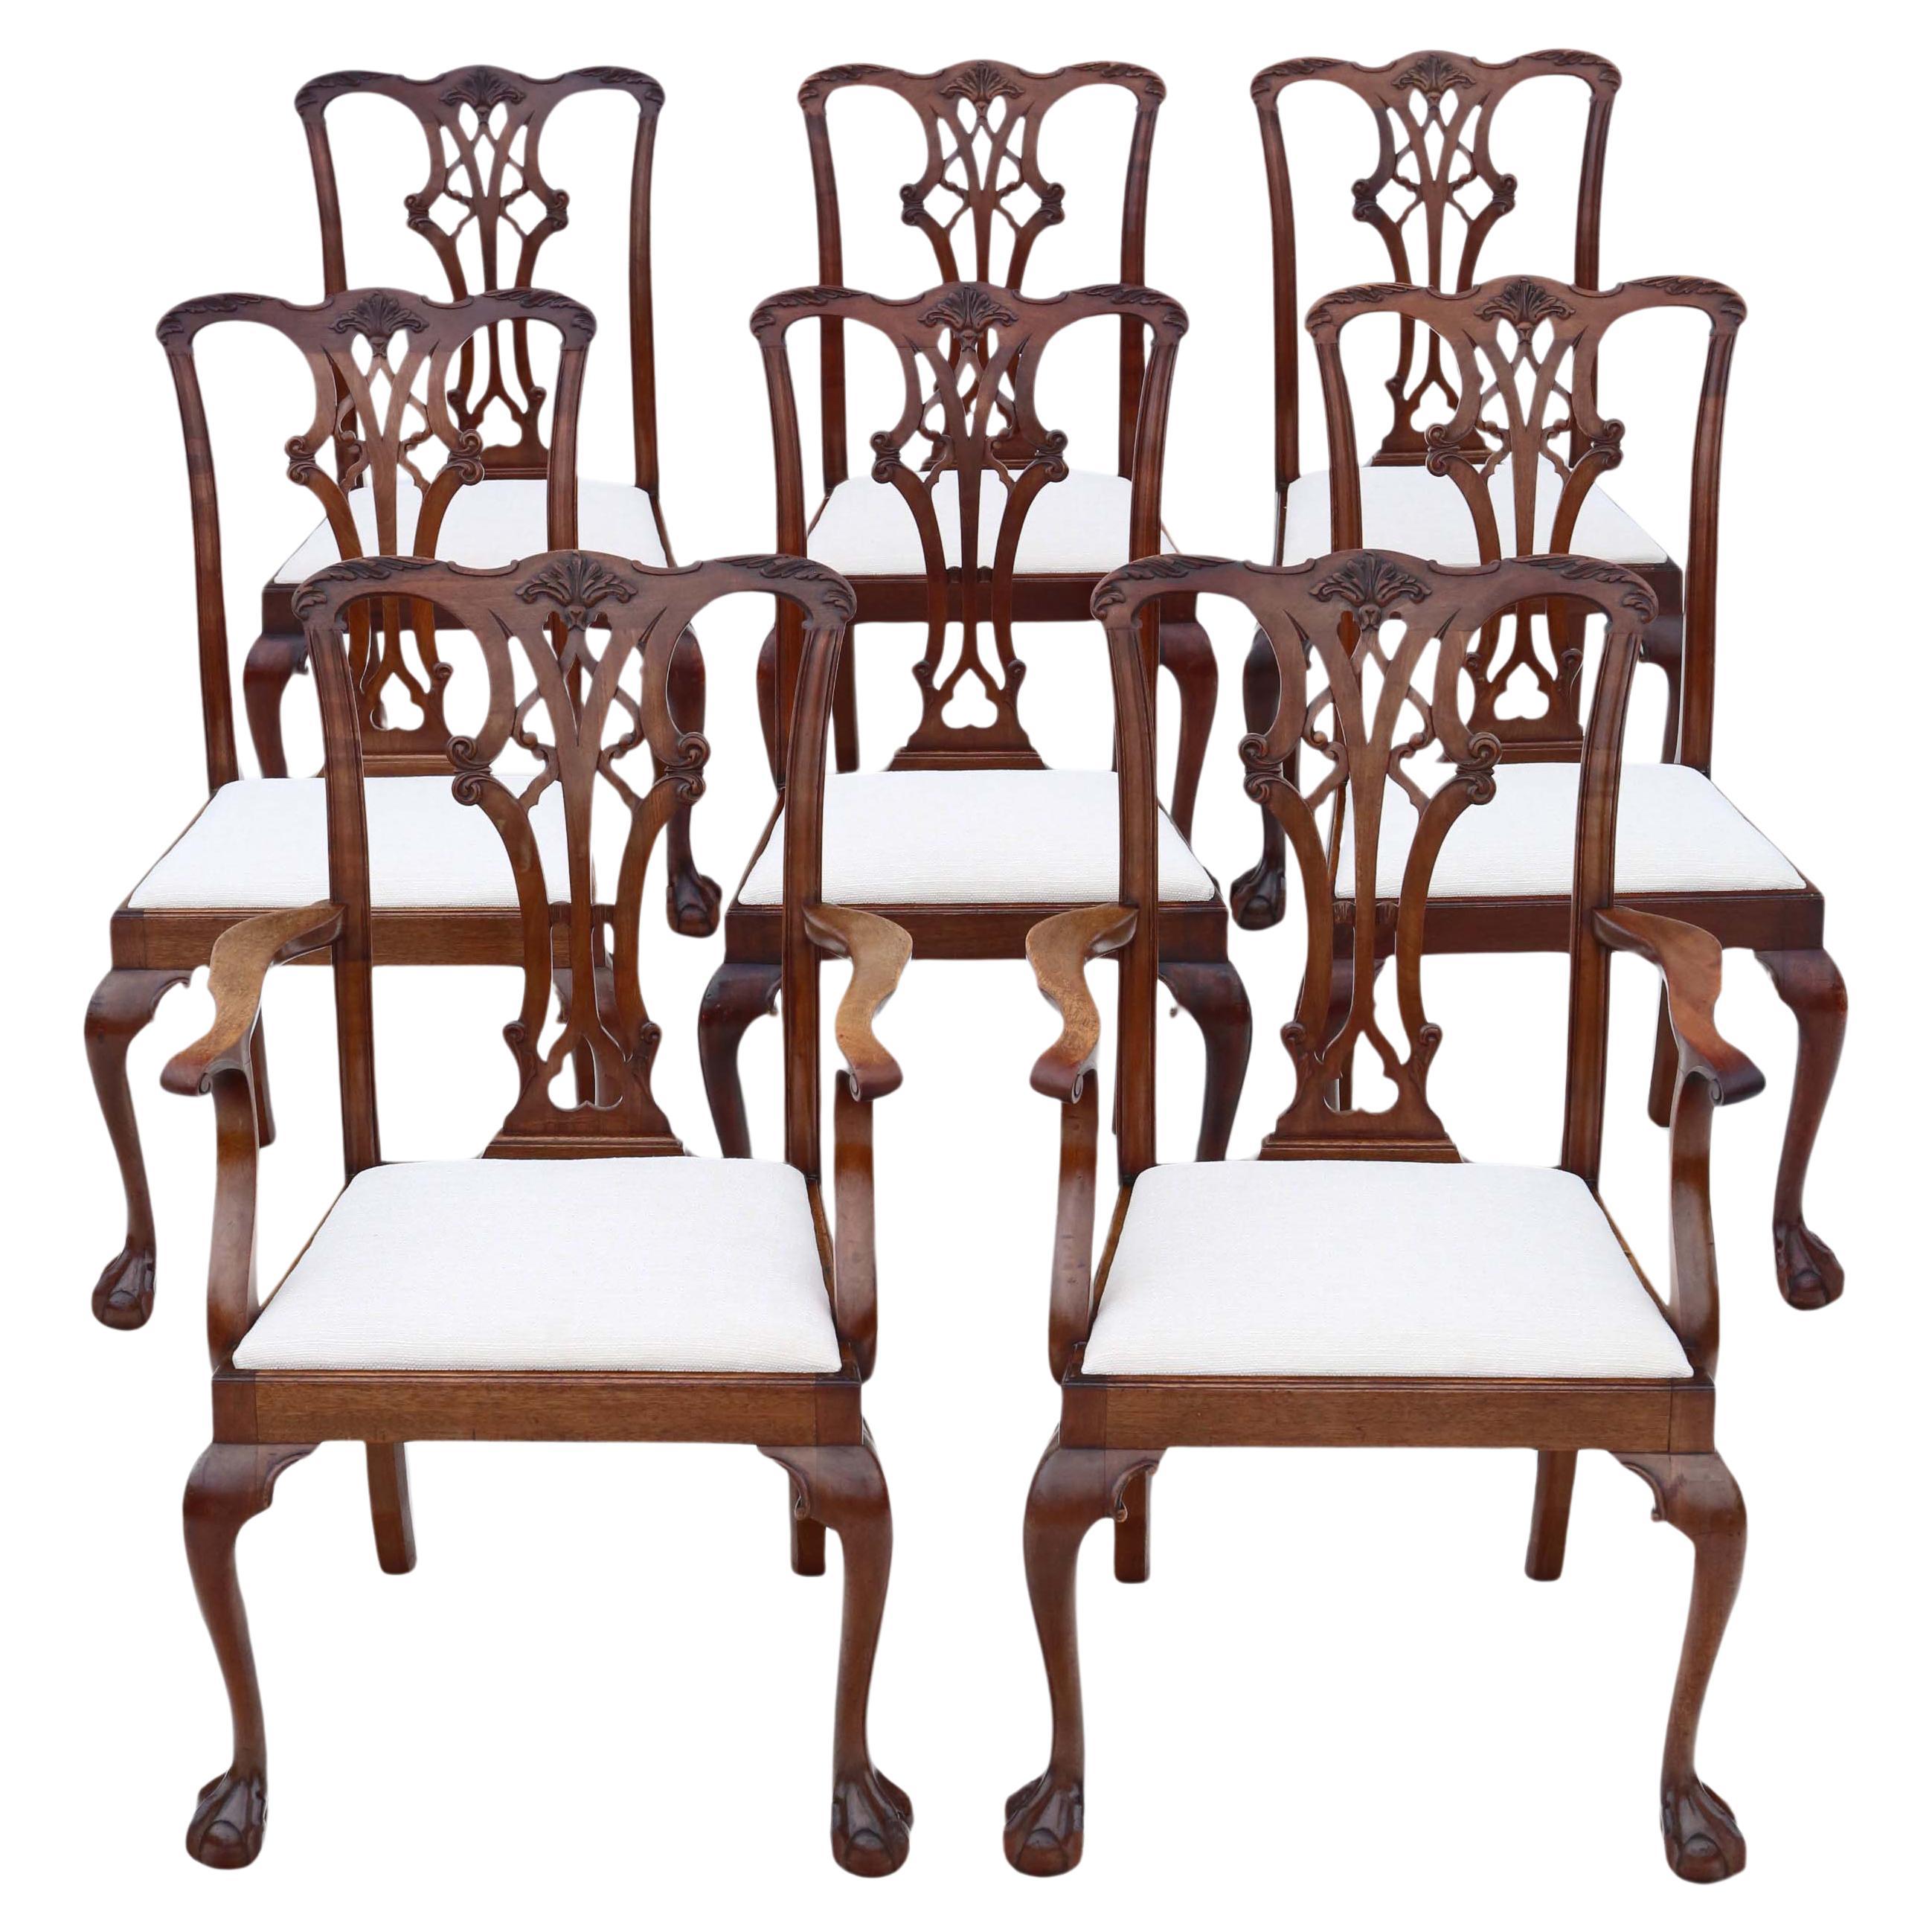 Georgian Revival Mahogany Dining Chairs: Set of 8 (6+2), Antique Quality, C1910